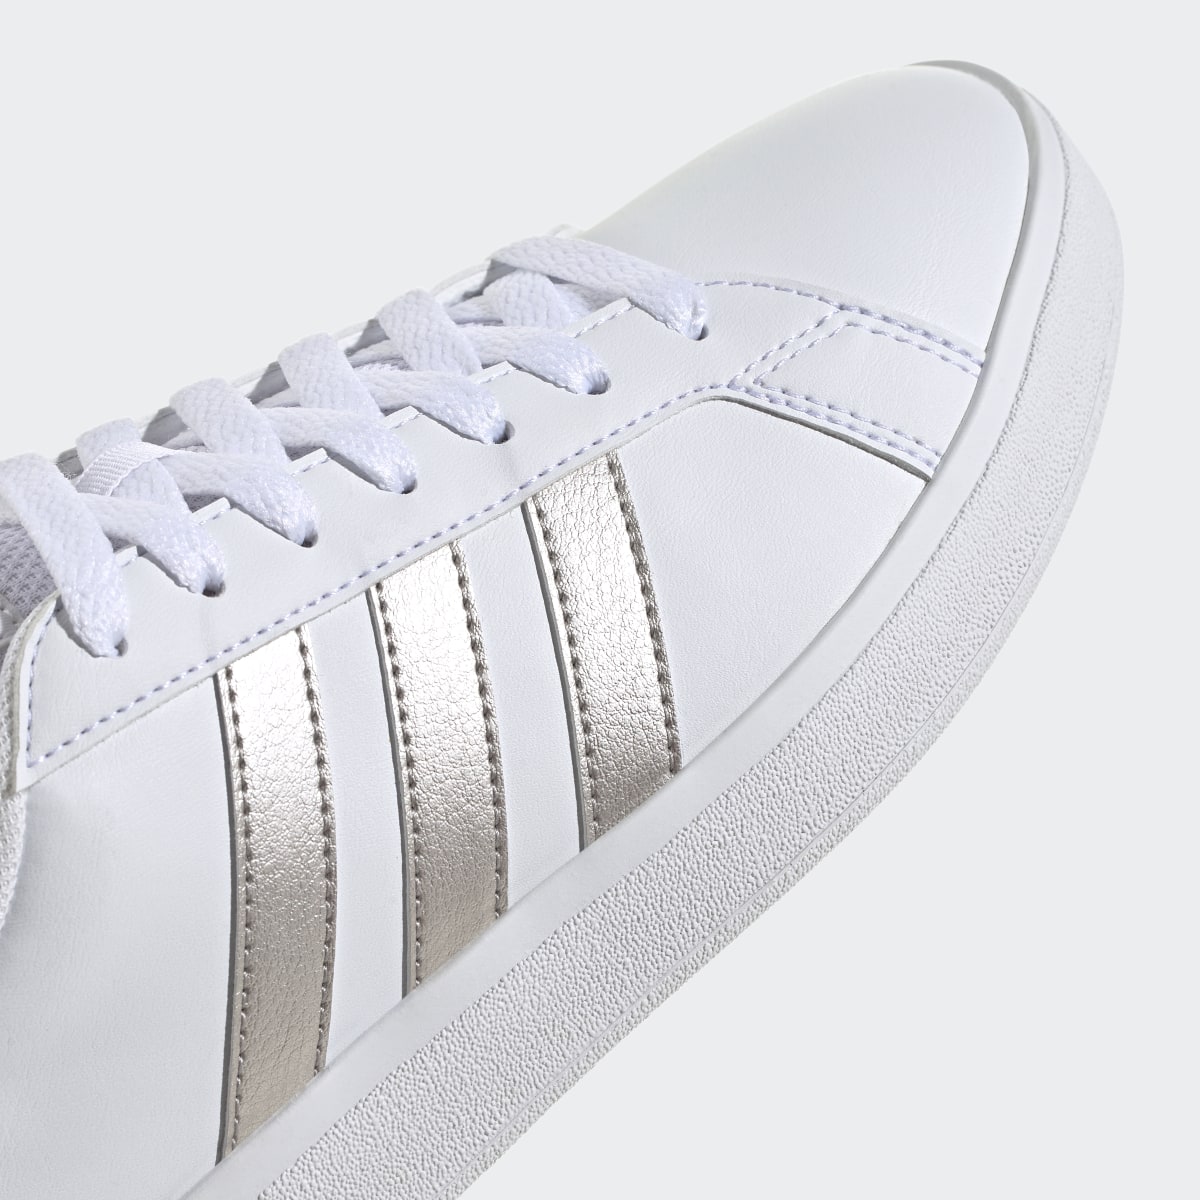 Adidas Grand Court TD Lifestyle Court Casual Shoes. 9